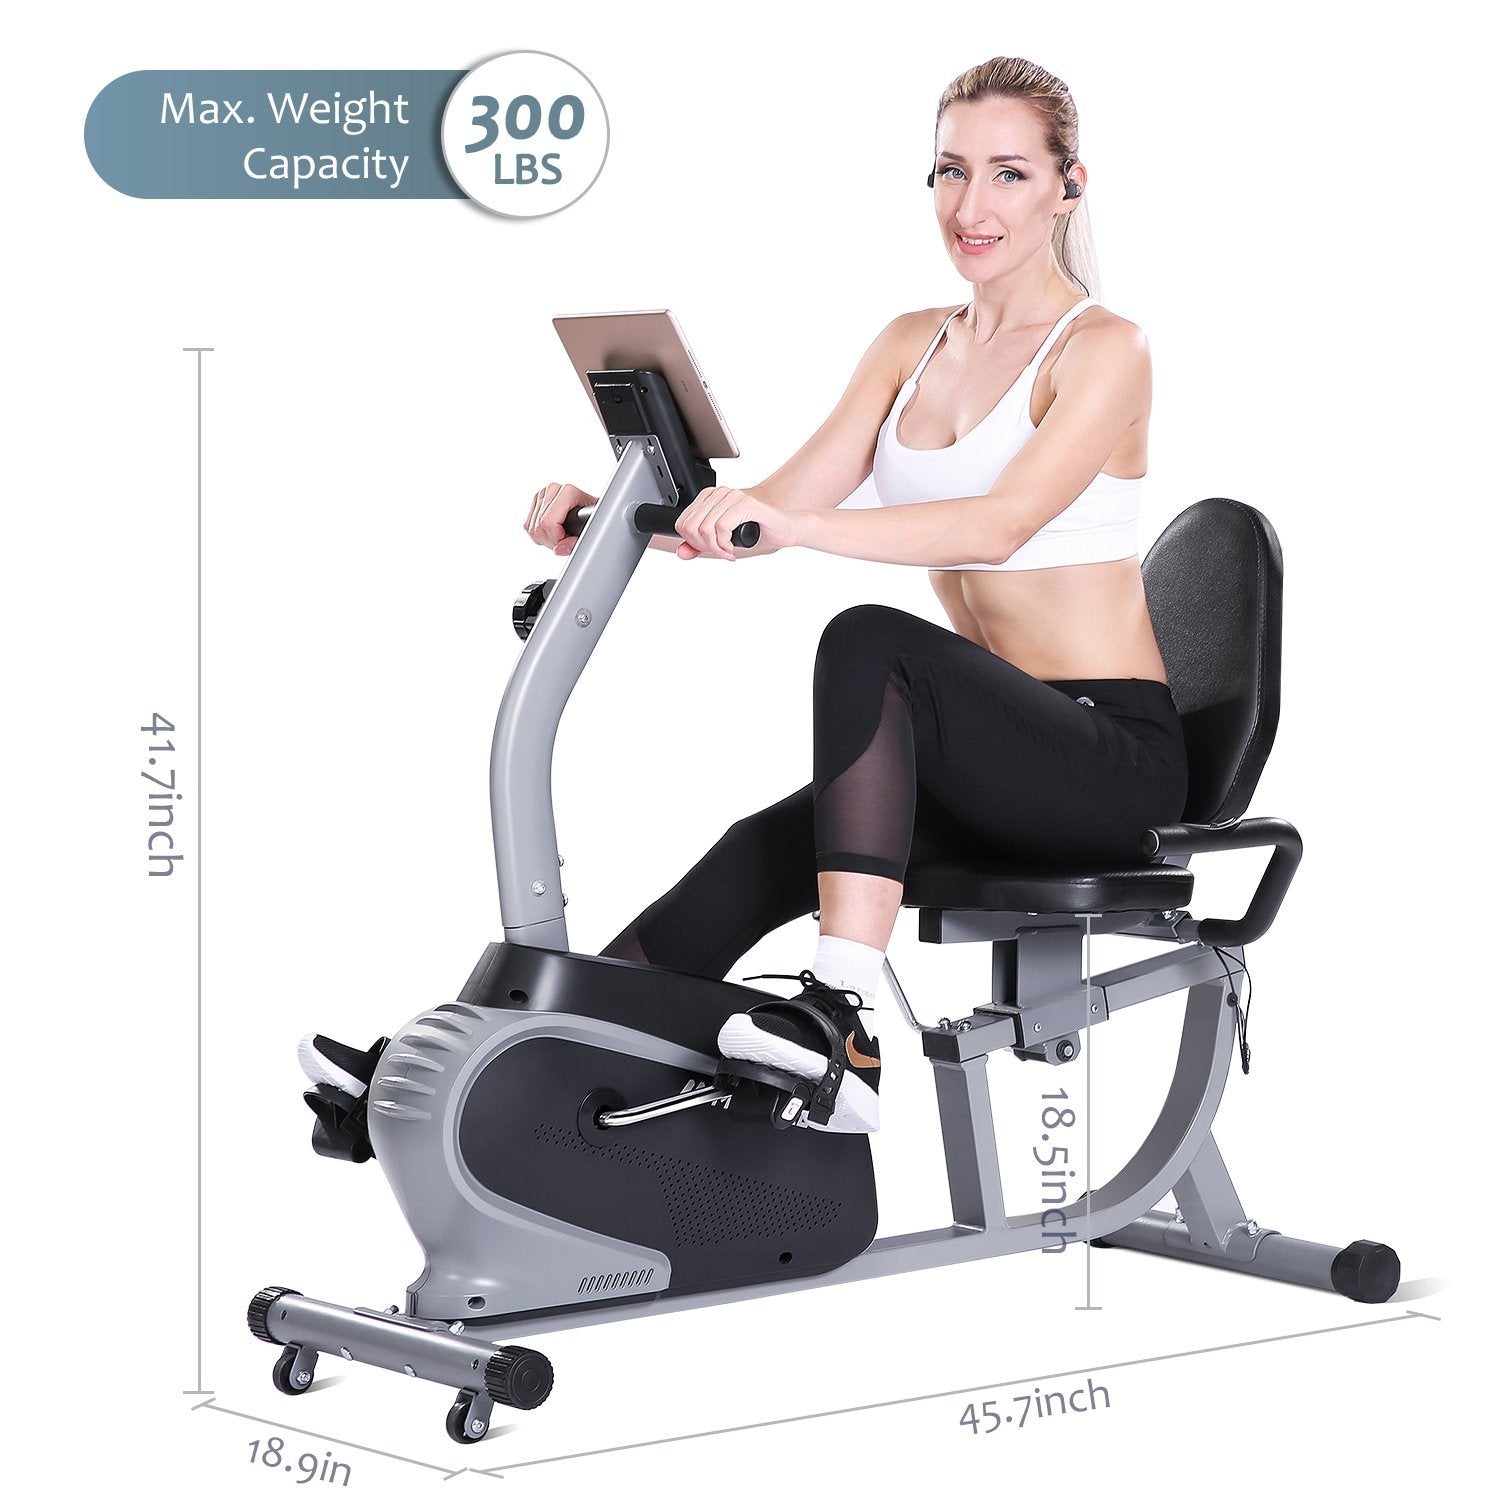 Load image into Gallery viewer, MaxKare Recumbent Exercise Bike Indoor Cycling Stationary Bike with Adjustable Seat and Resistance, Pulse Monitor/Phone Holder (Seat Height Adjustment by Lever) - NAIPO
